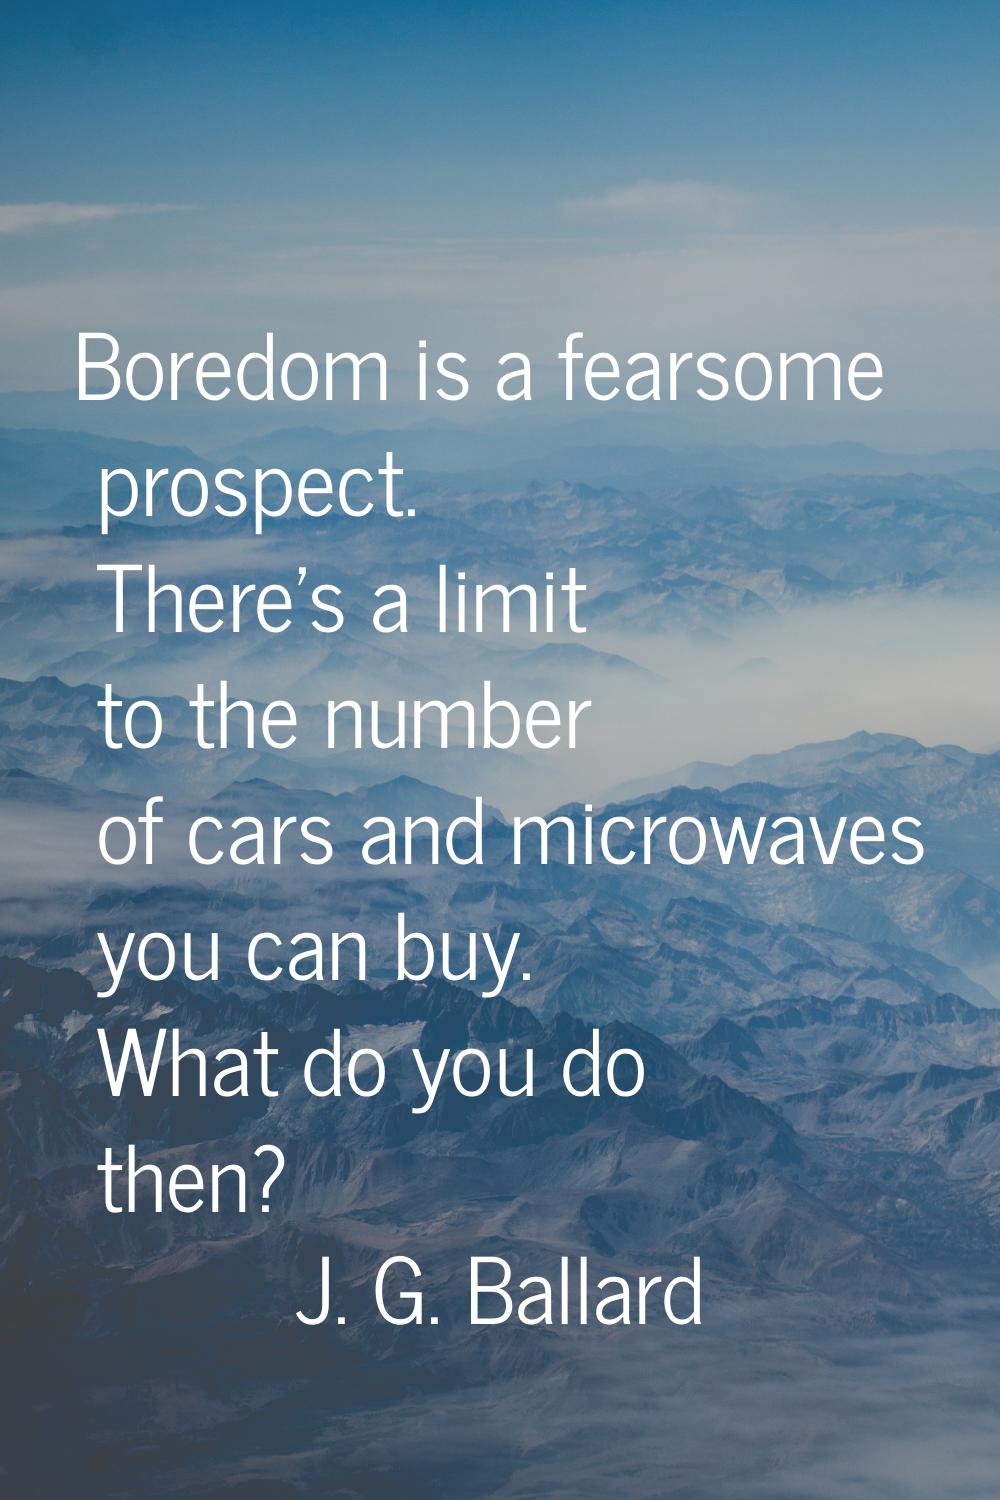 Boredom is a fearsome prospect. There's a limit to the number of cars and microwaves you can buy. W